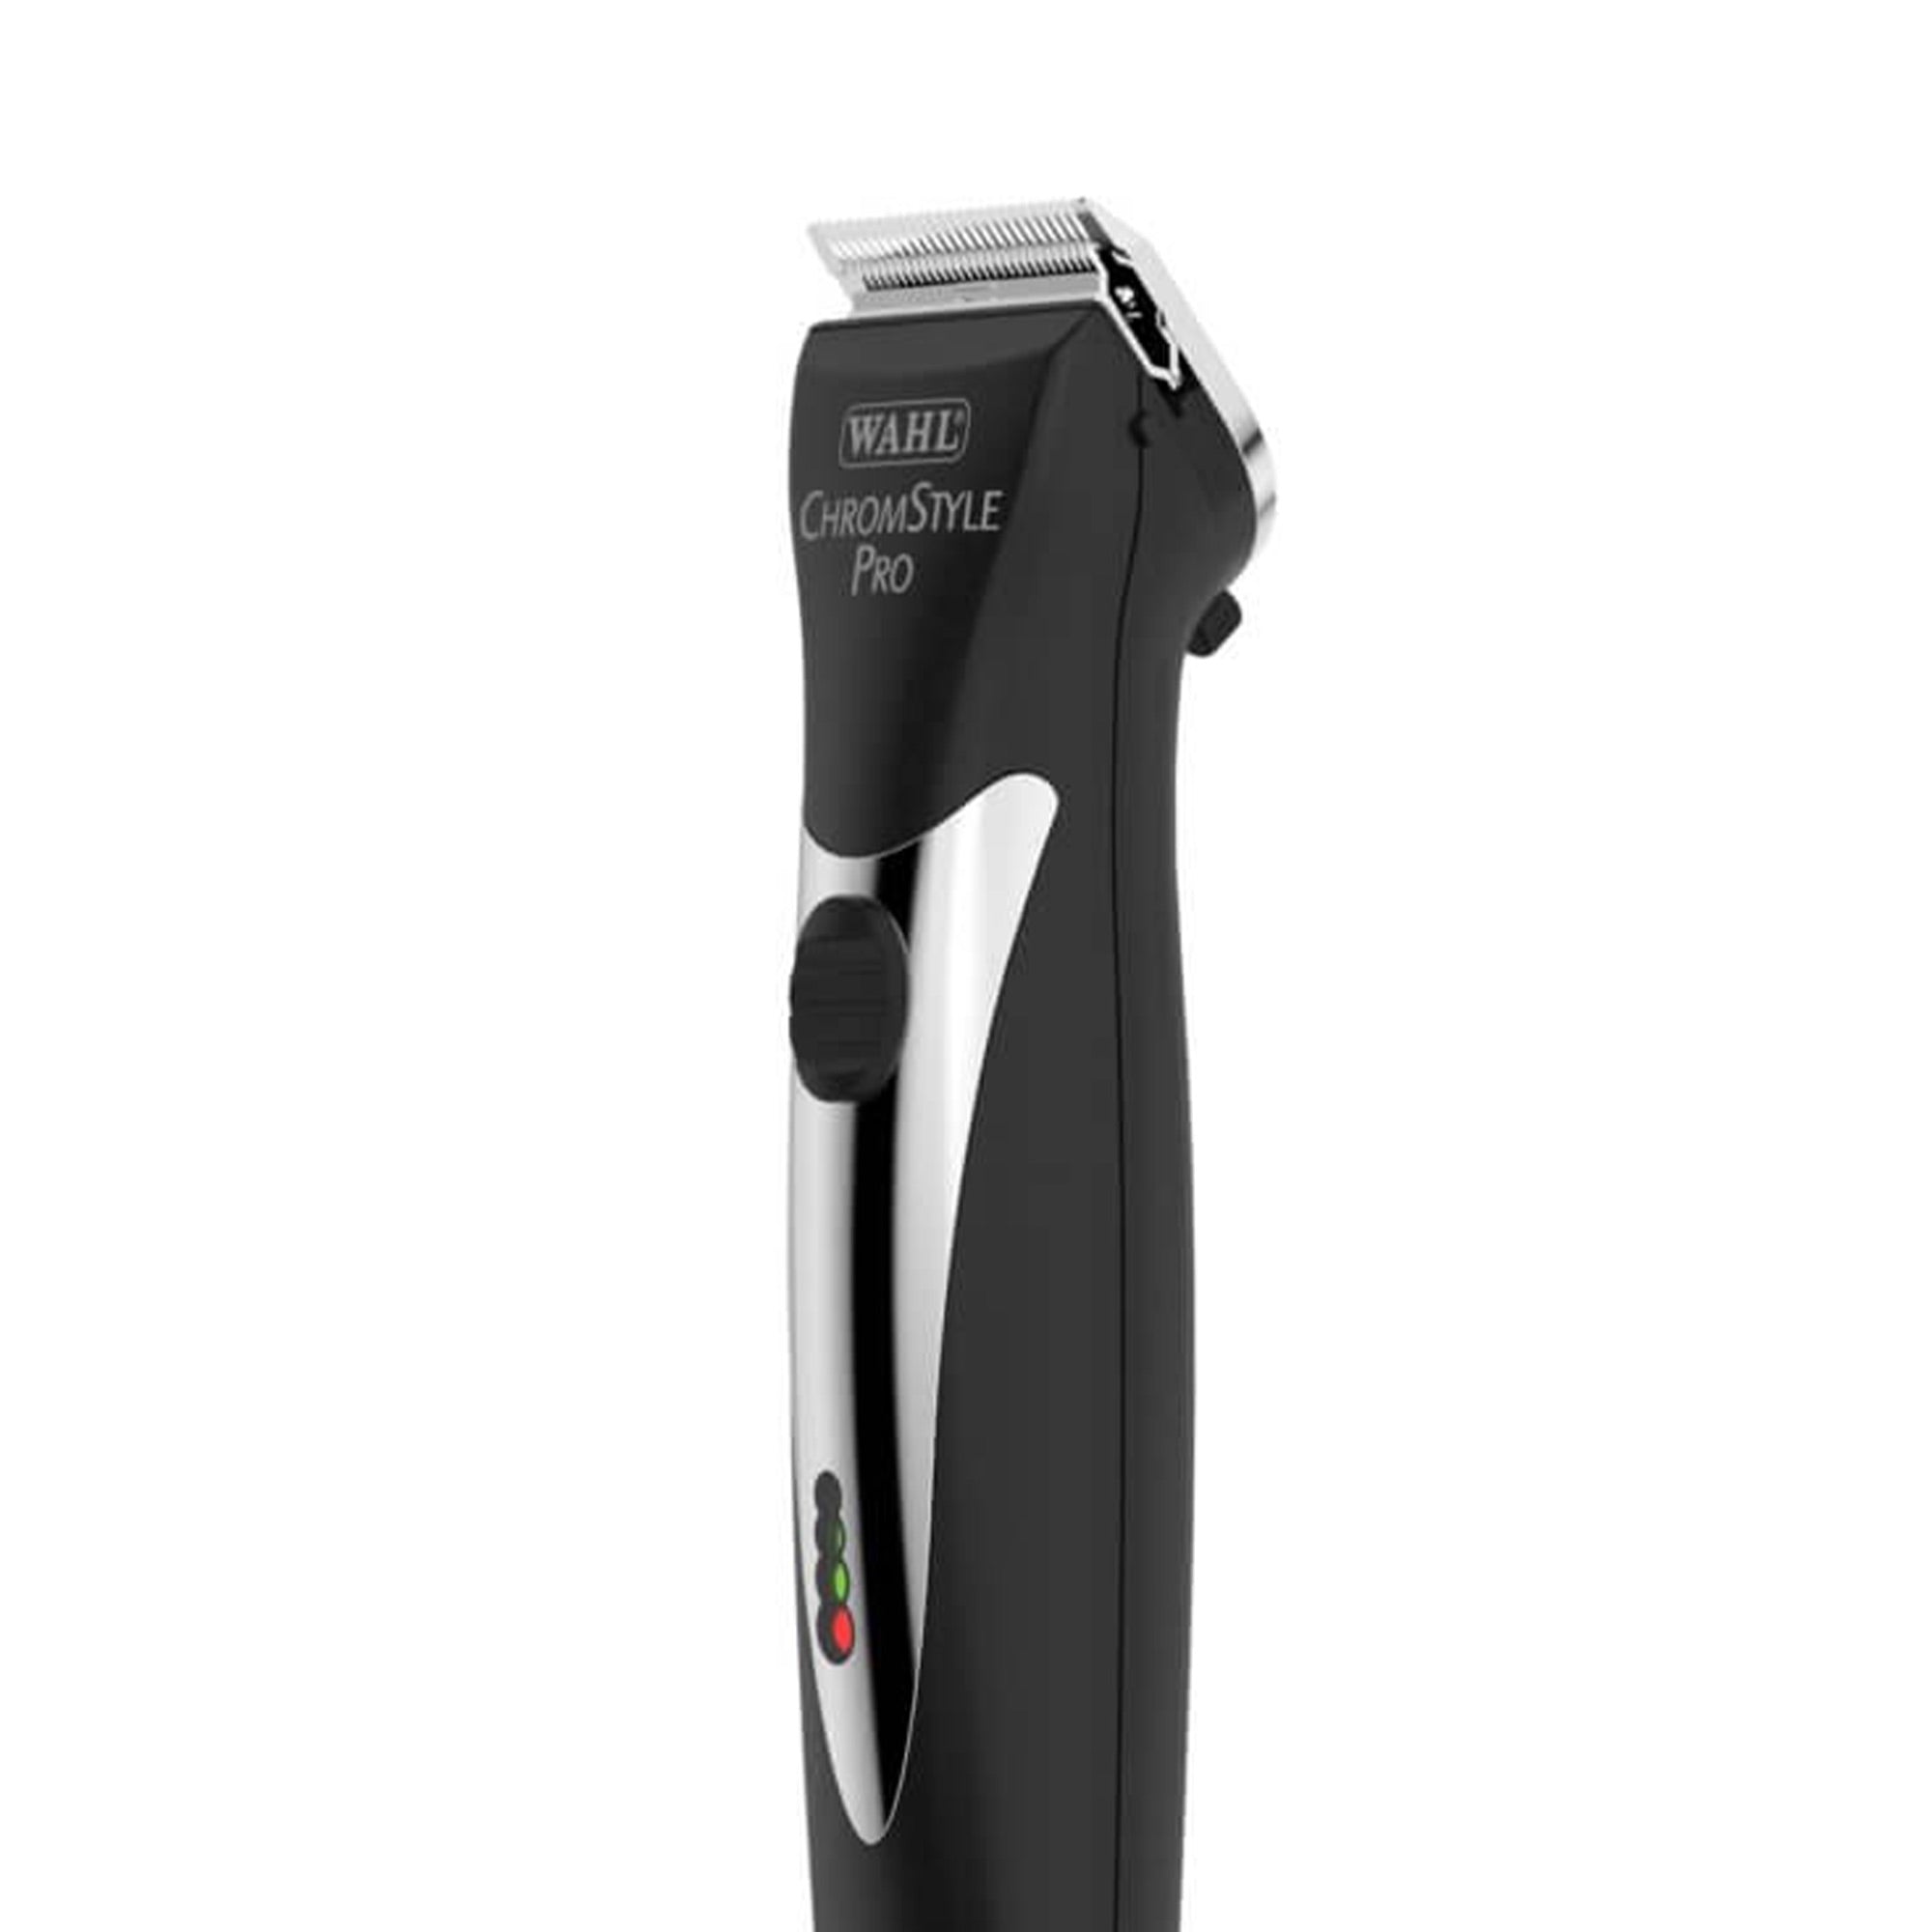 Wahl - Chromstyle Pro Clipper Cordless